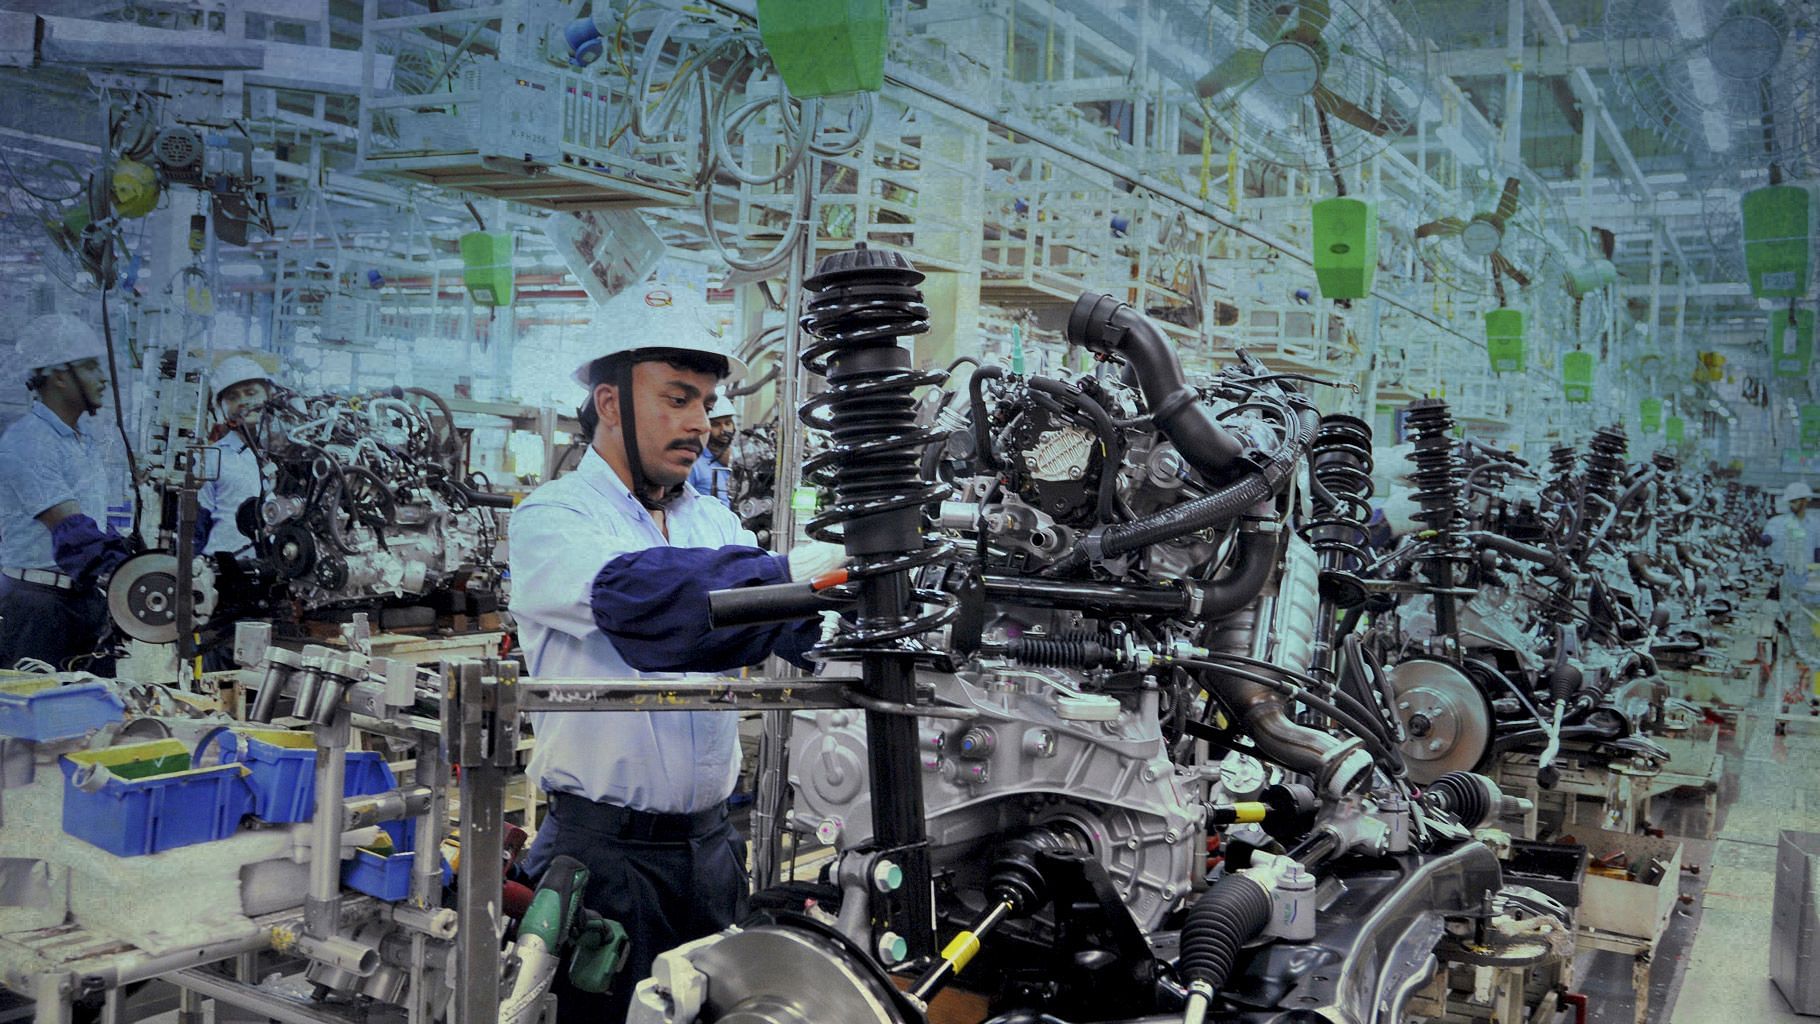 Exciting Times for Industrial Manufacturing Sector in India in Next 12 Months